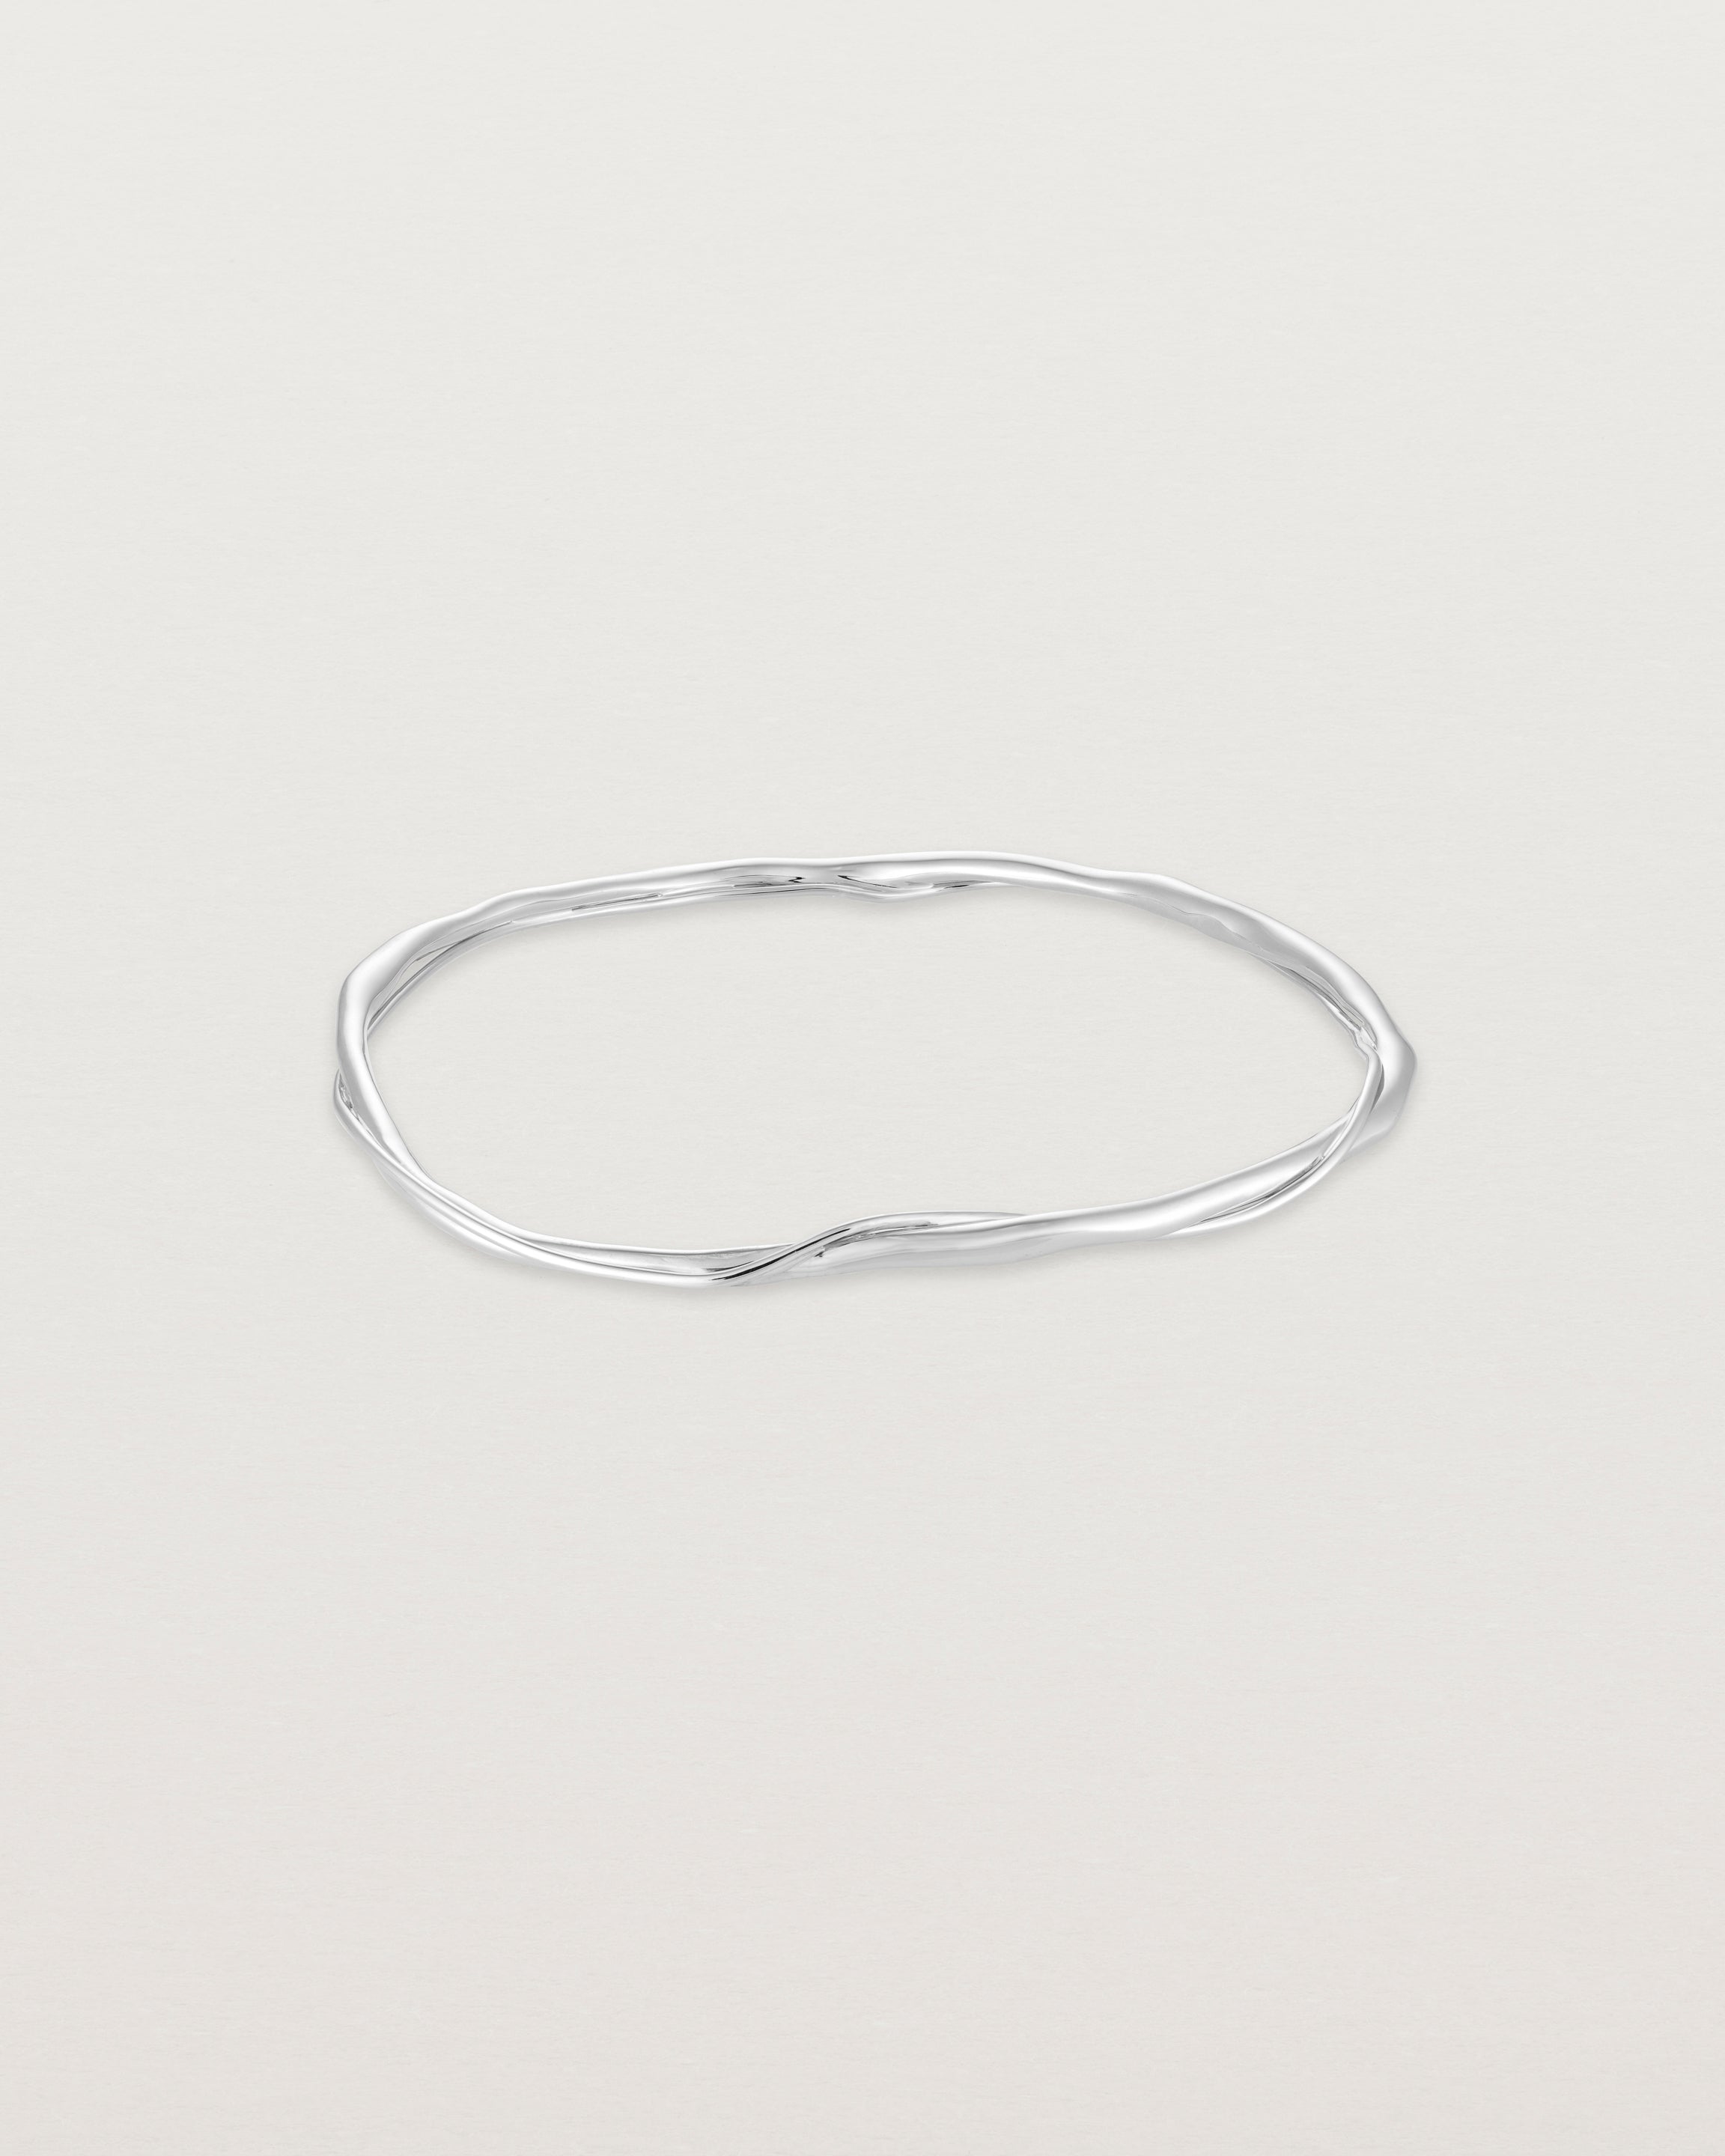 Front view of the Dalí Bangle in sterling silver.